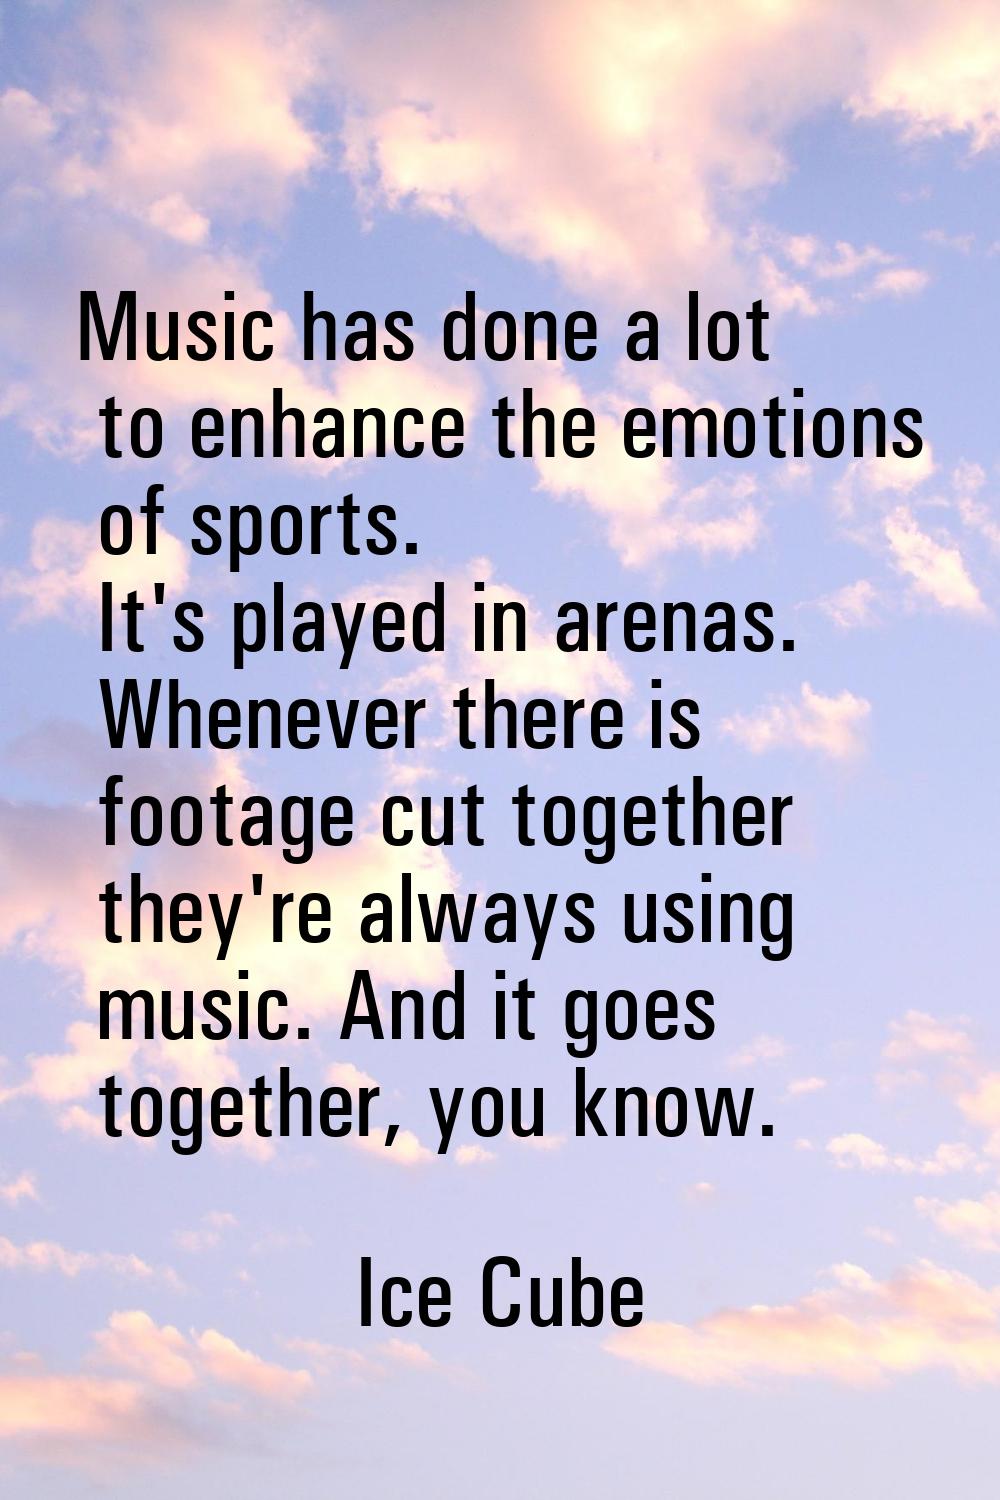 Music has done a lot to enhance the emotions of sports. It's played in arenas. Whenever there is fo